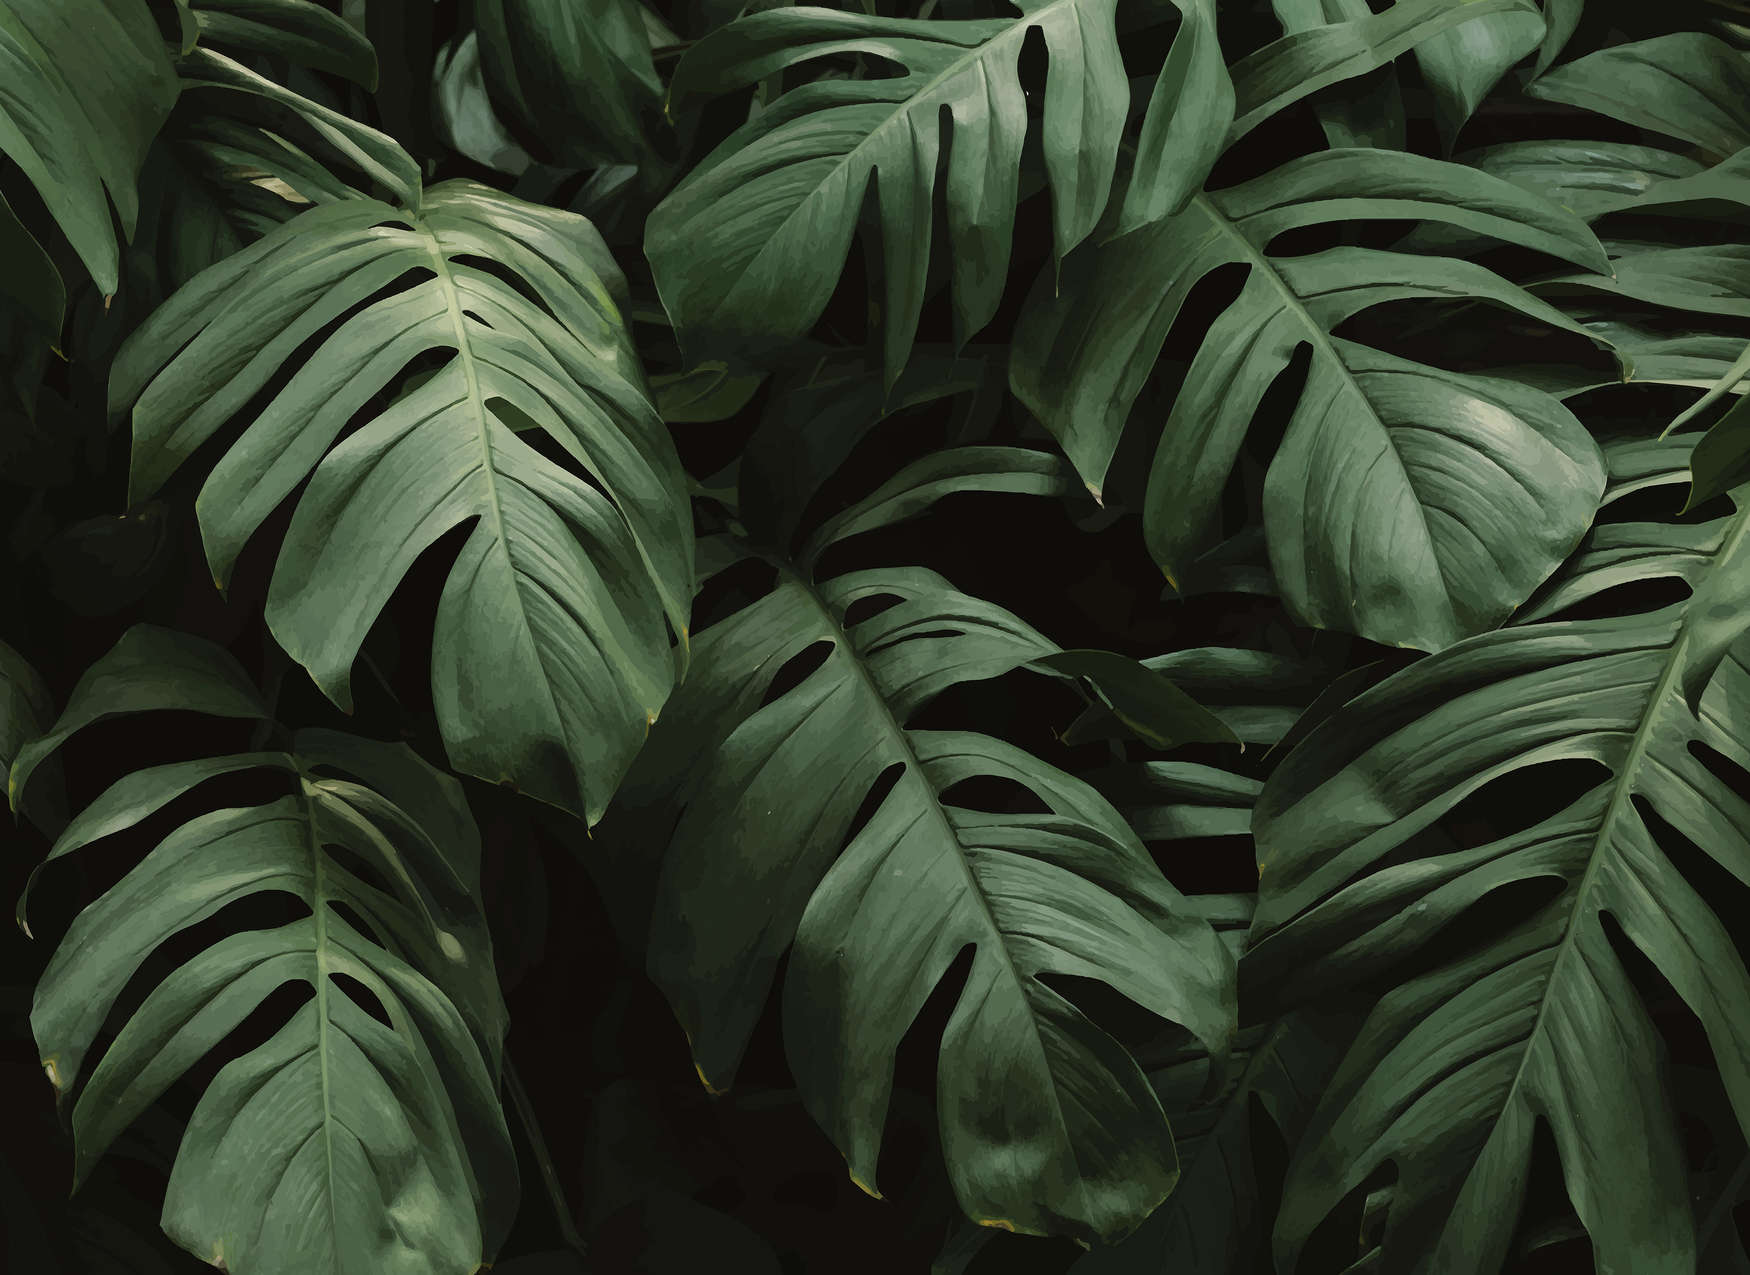 Monstera leaves in a dark background - Jungle, Monstera